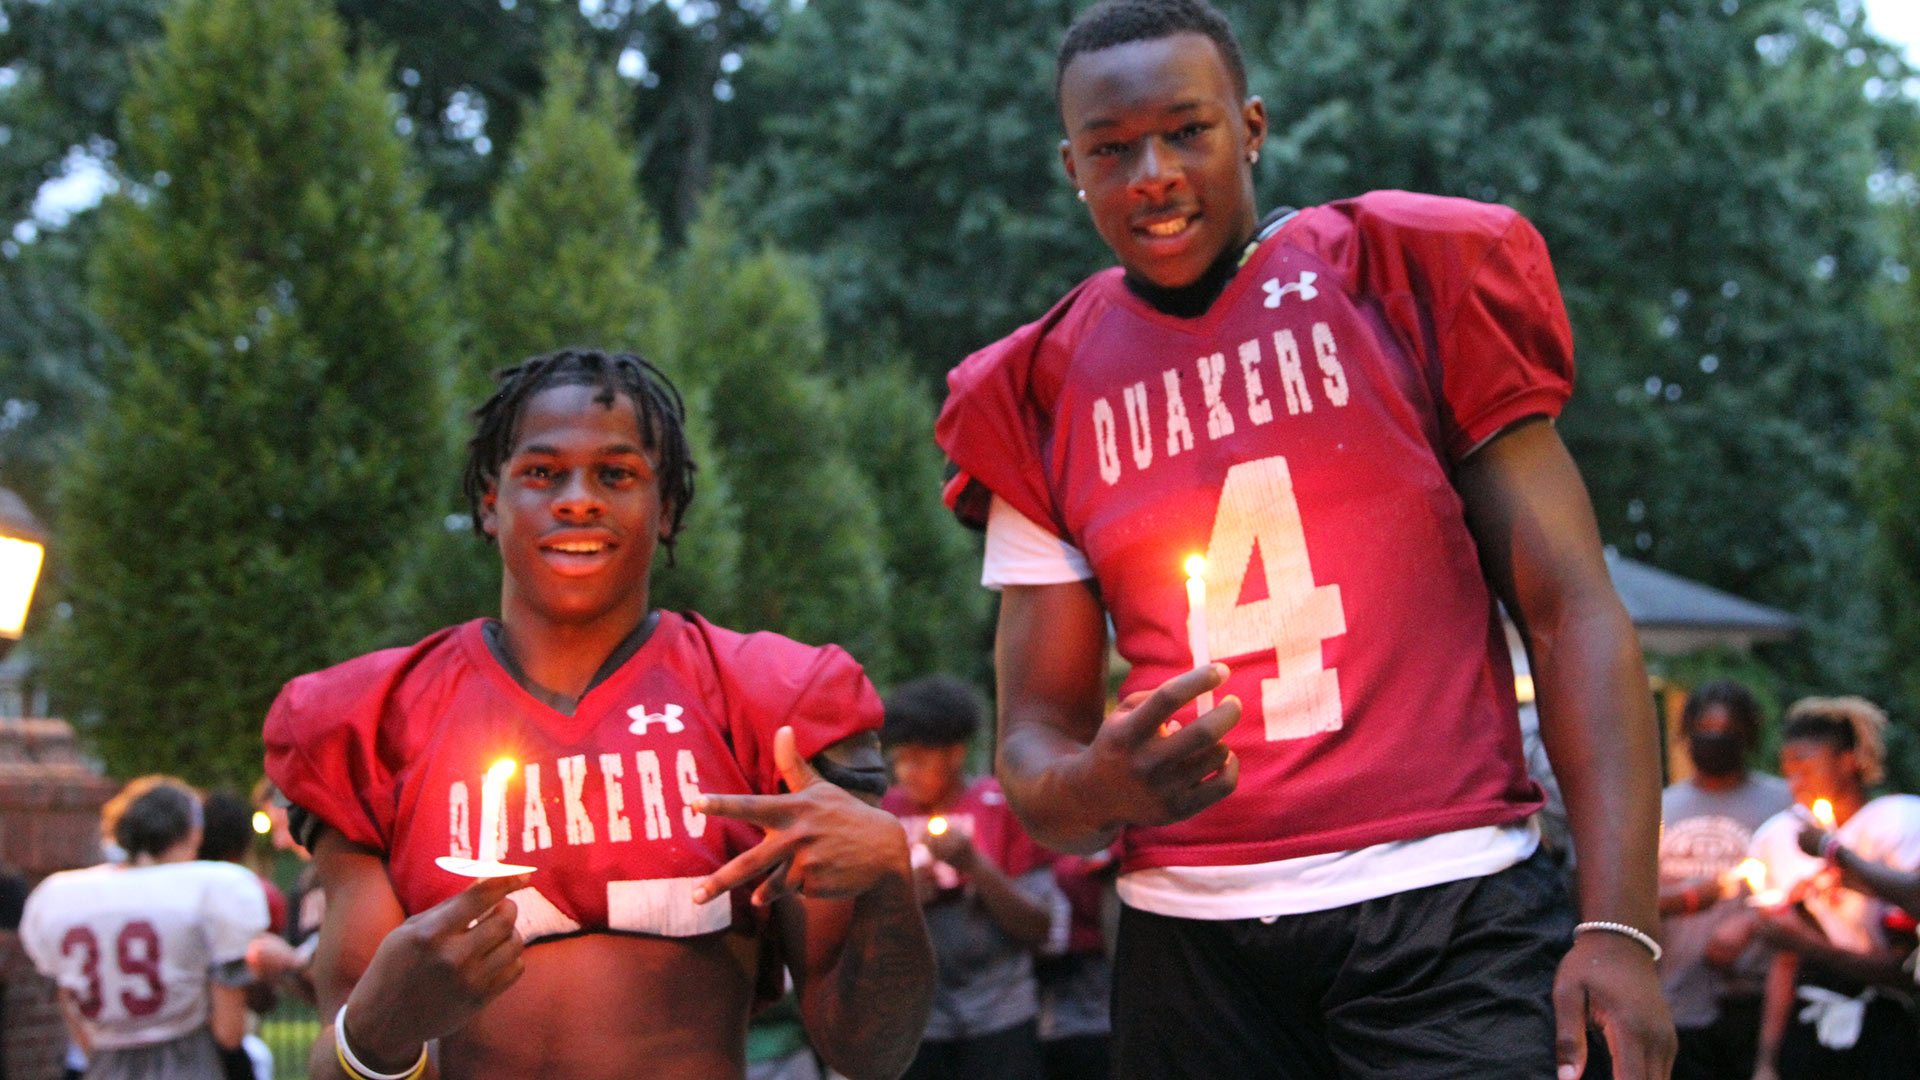 Two football players hold their candles and smile at the camera.